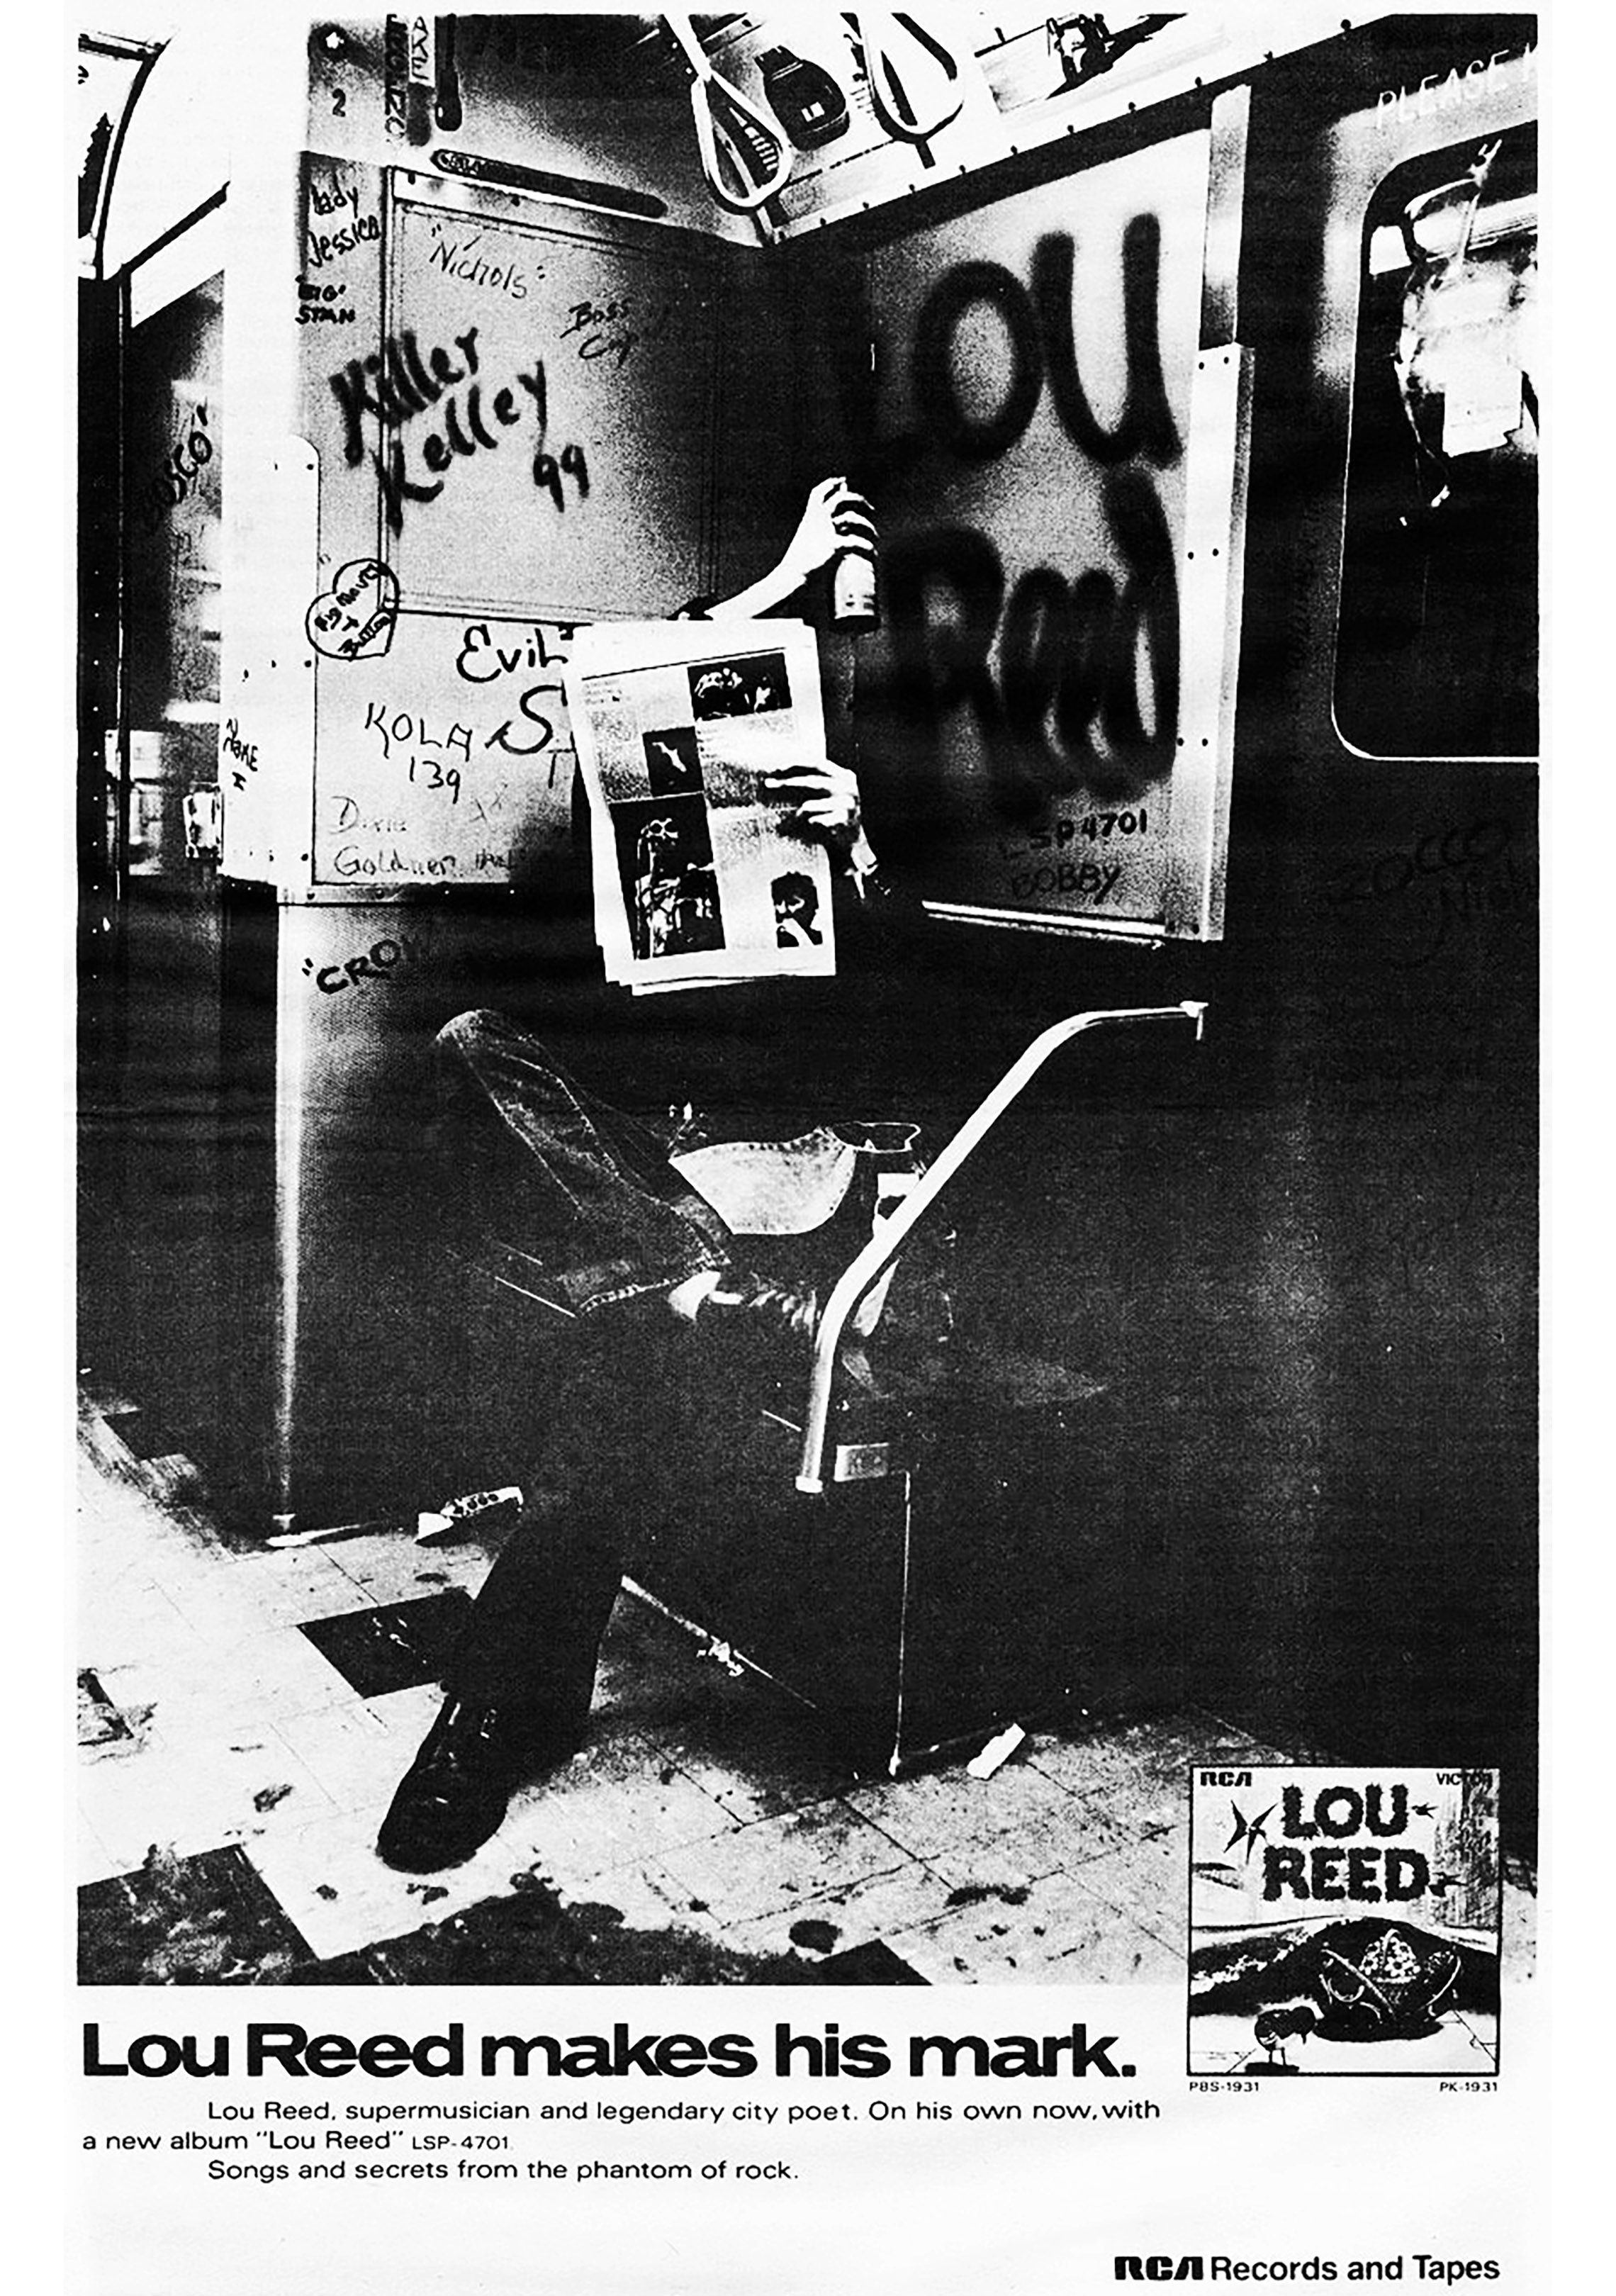 Wild!: How RCA Records plugged Lou Reed's subversion in 7 print ads — proxy  music